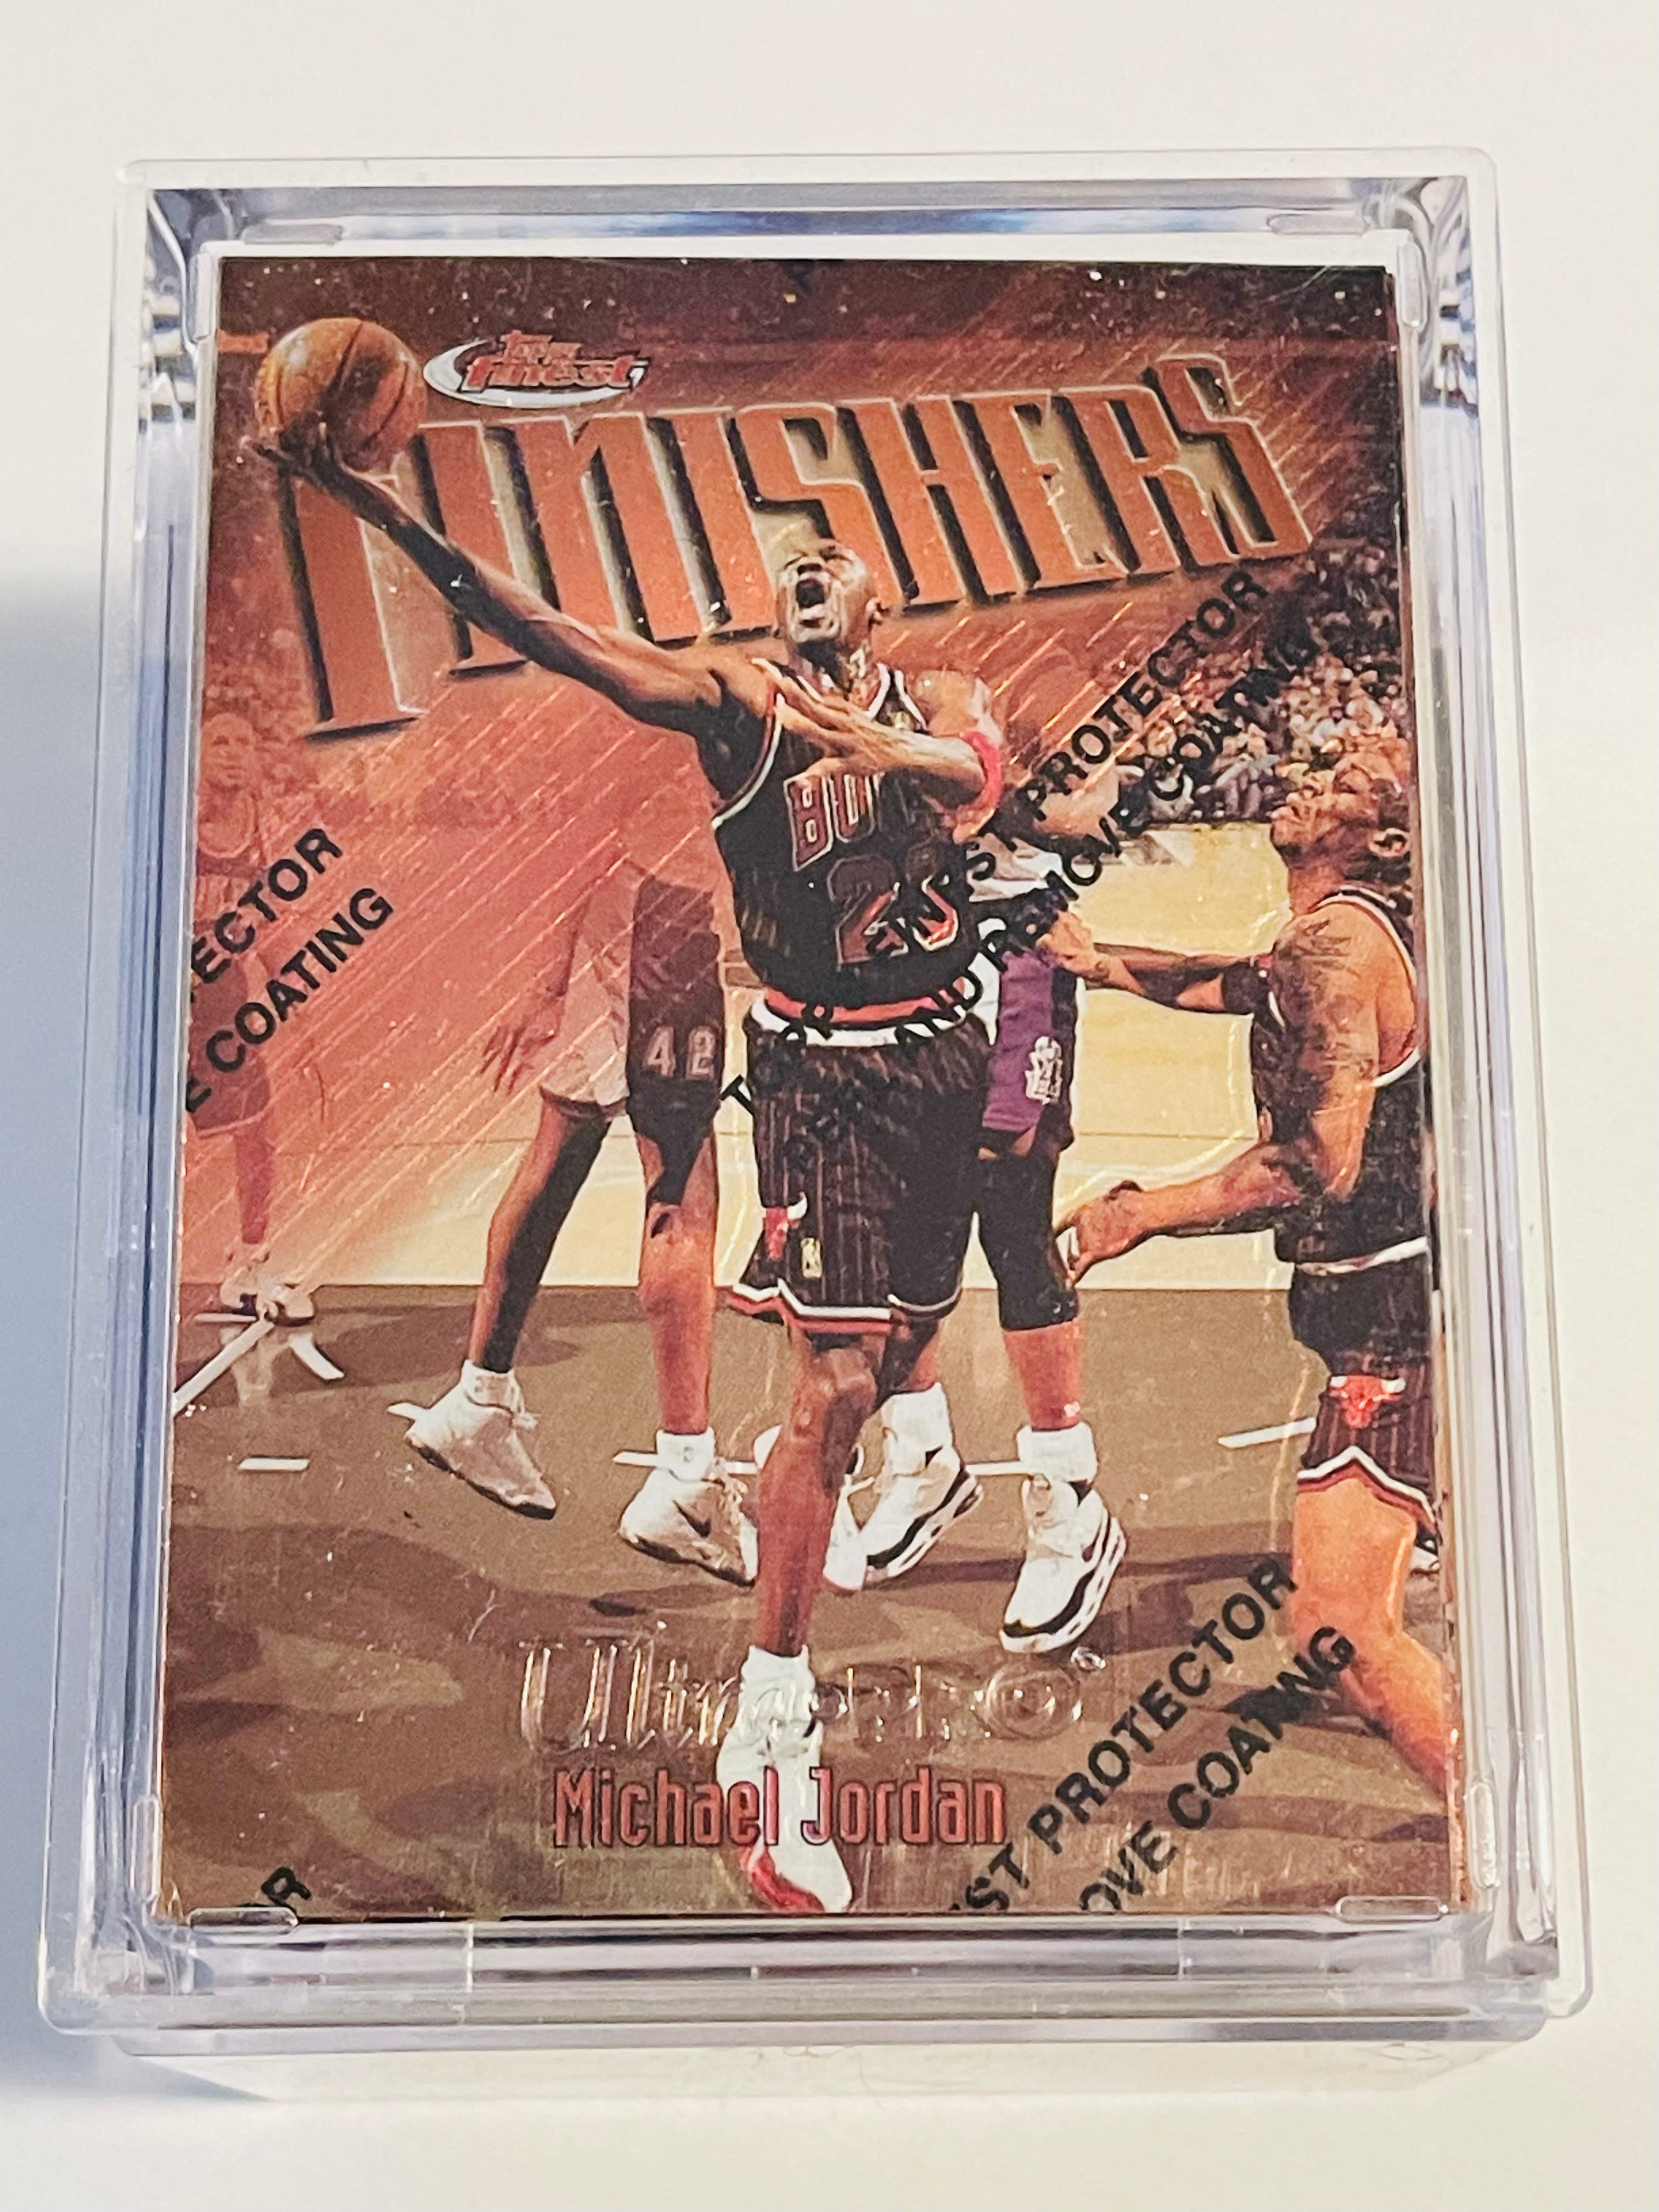 1997/98 Topps Finest basketball series 1 cards set with all the rookies